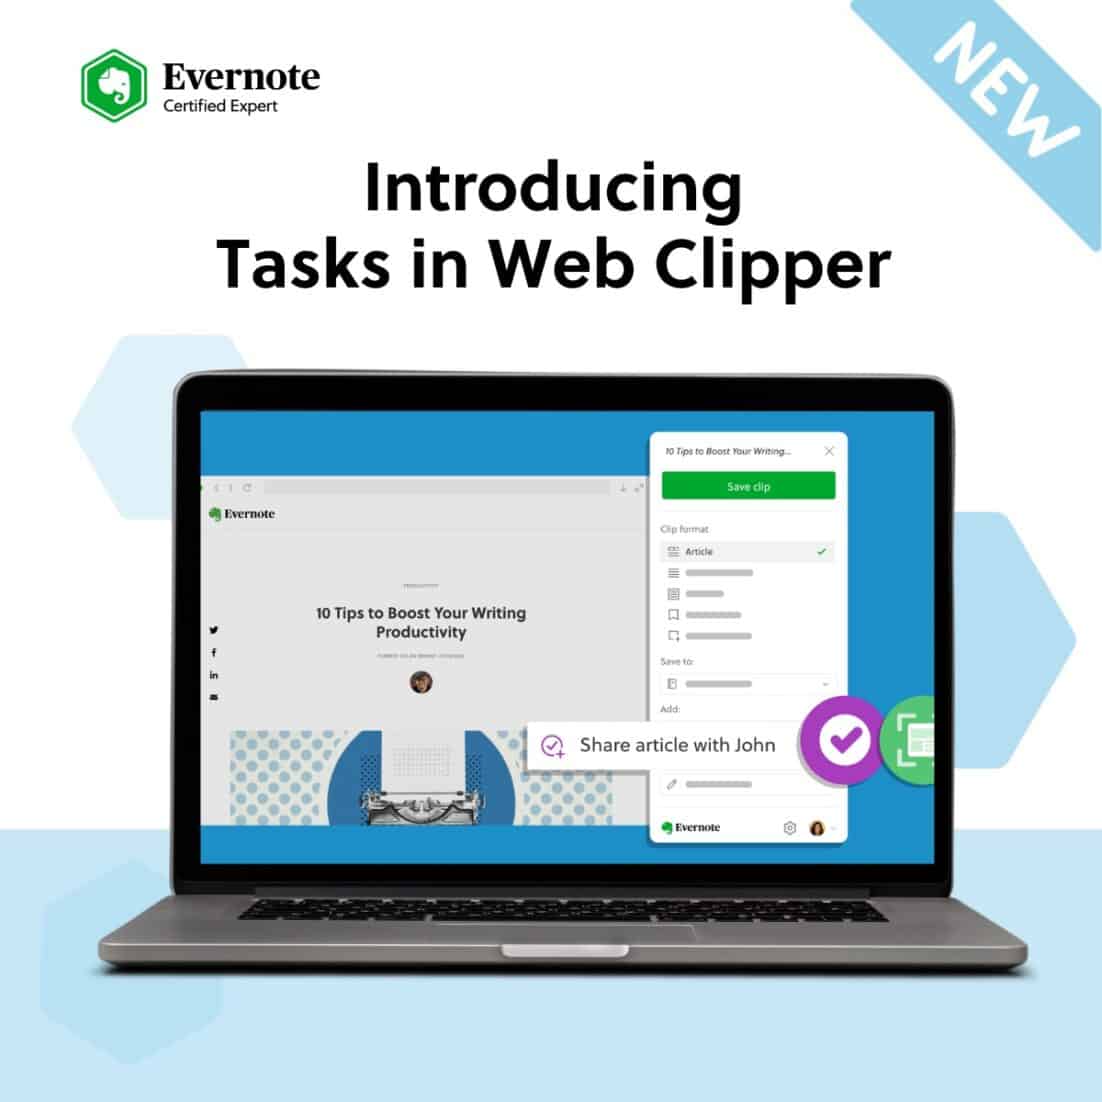 image of Evernote Web Clipper Drop Down menu on a laptop